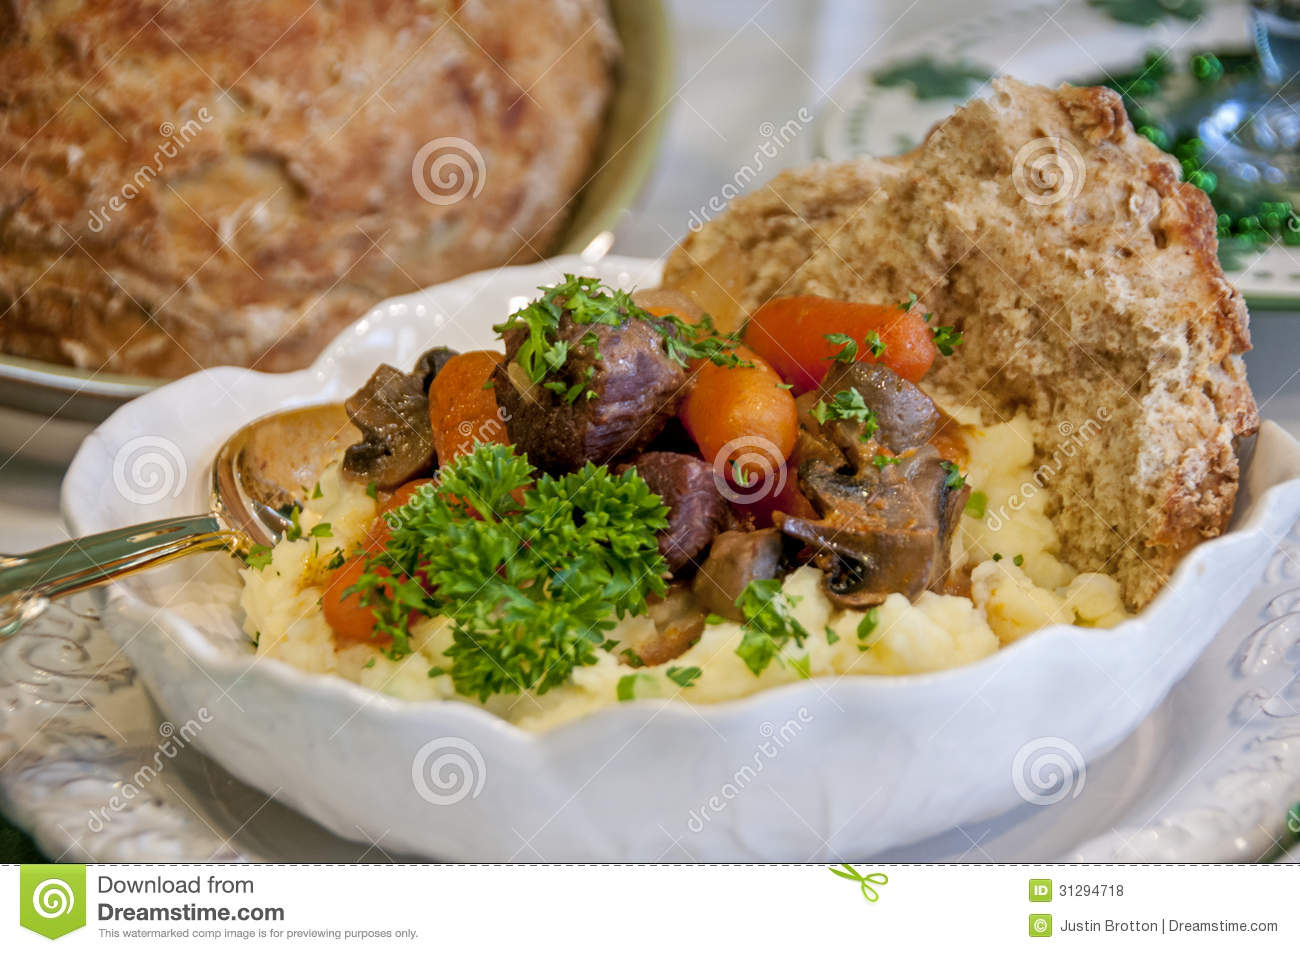 This Is A Beef Stew With Vegetables Over A Mashed Potatoes With A